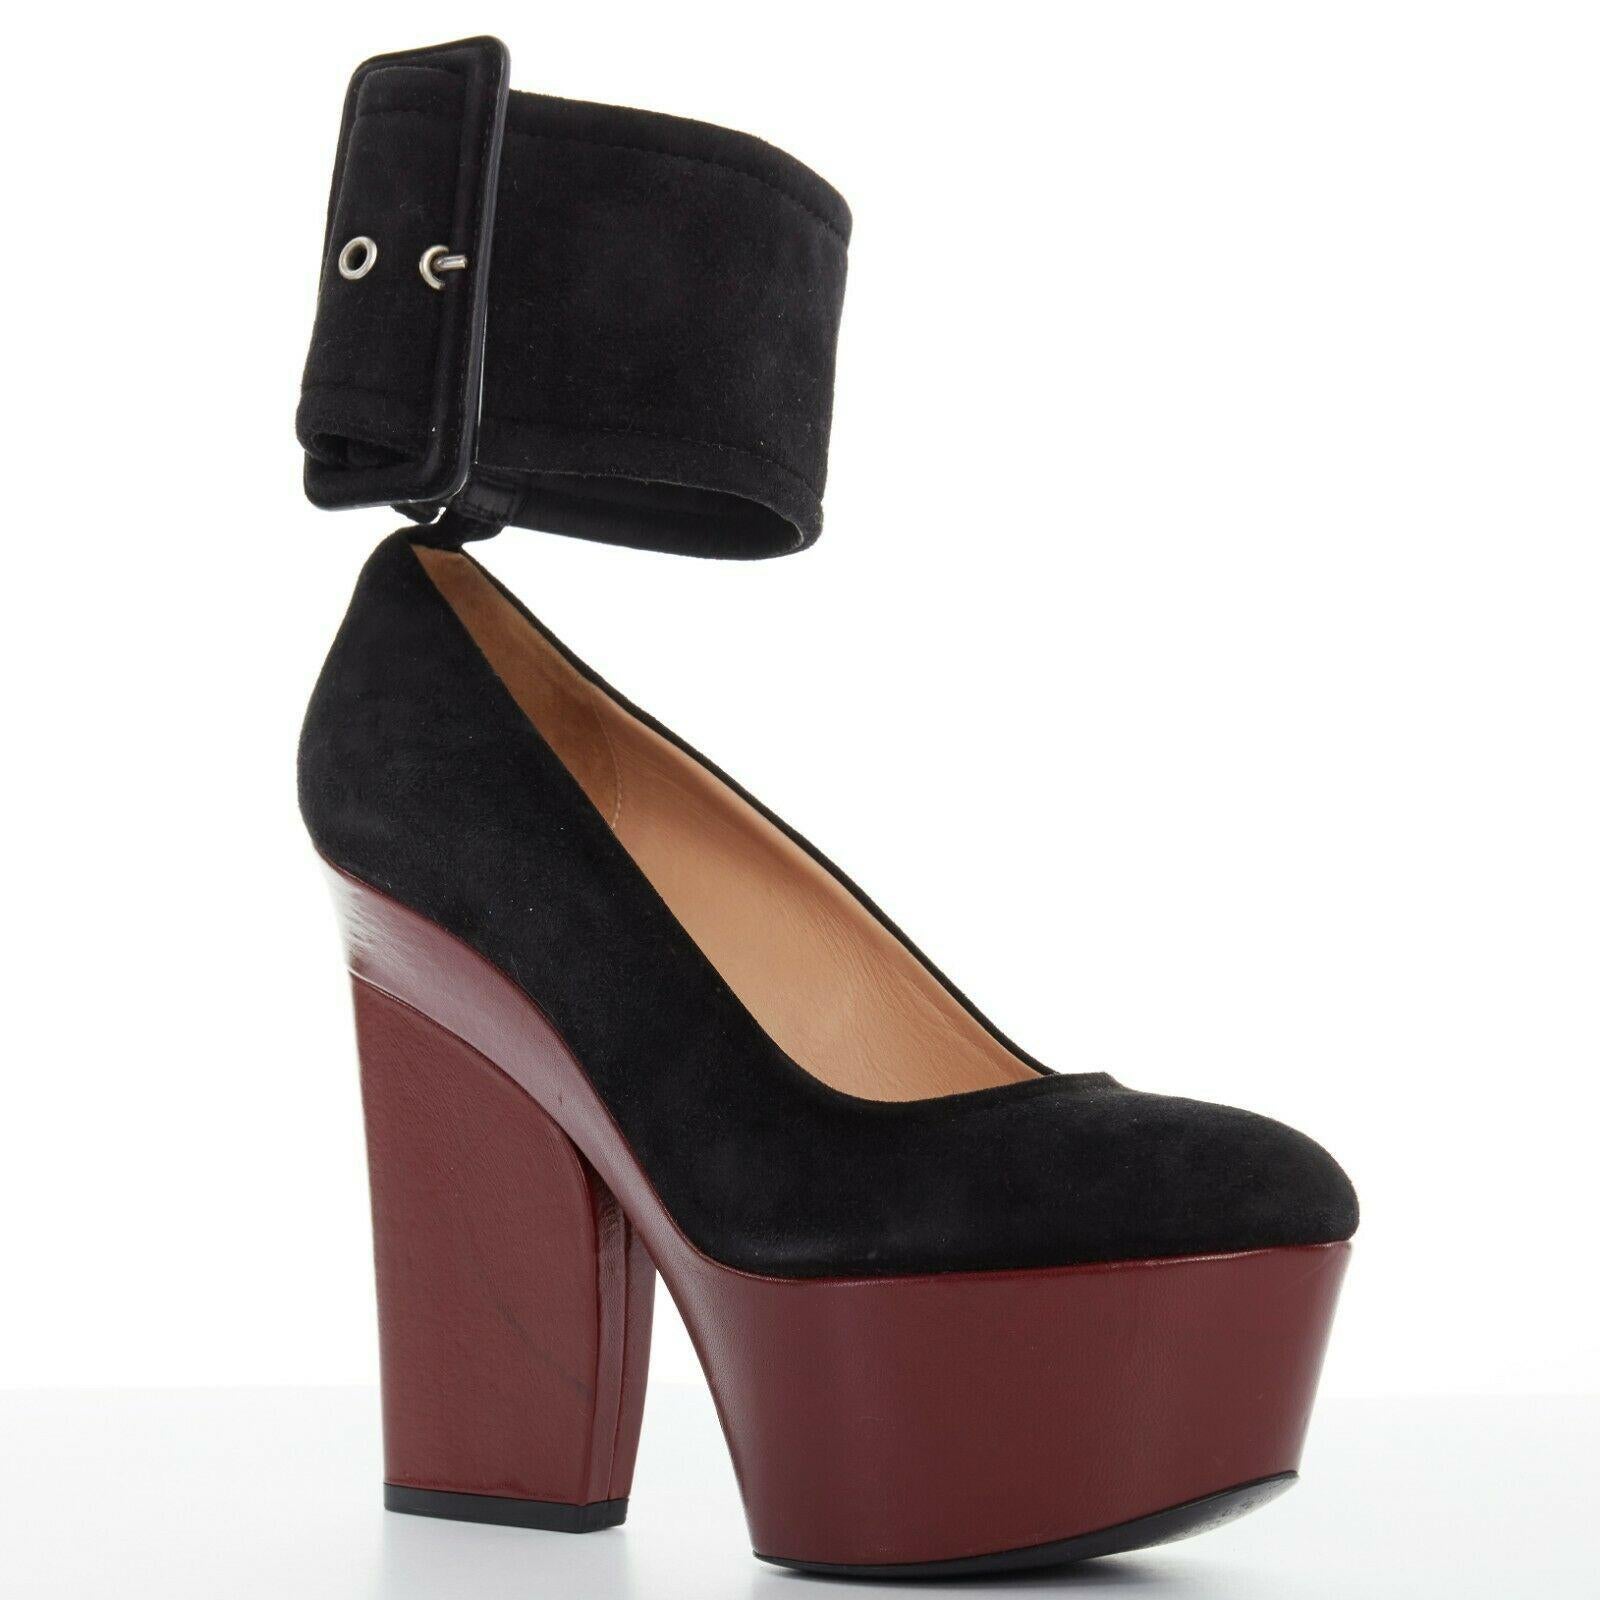 CELINE PHOEBE PHILO black suede red platform wedge wide ankle cuff heels EU38.5

CELINE BY PHOEBE PHILO
Black suede leather upper. Dark burgundy red leather covered platform heel. Almond round toe. Tonal stitching. Attached extra wide ankle cuff